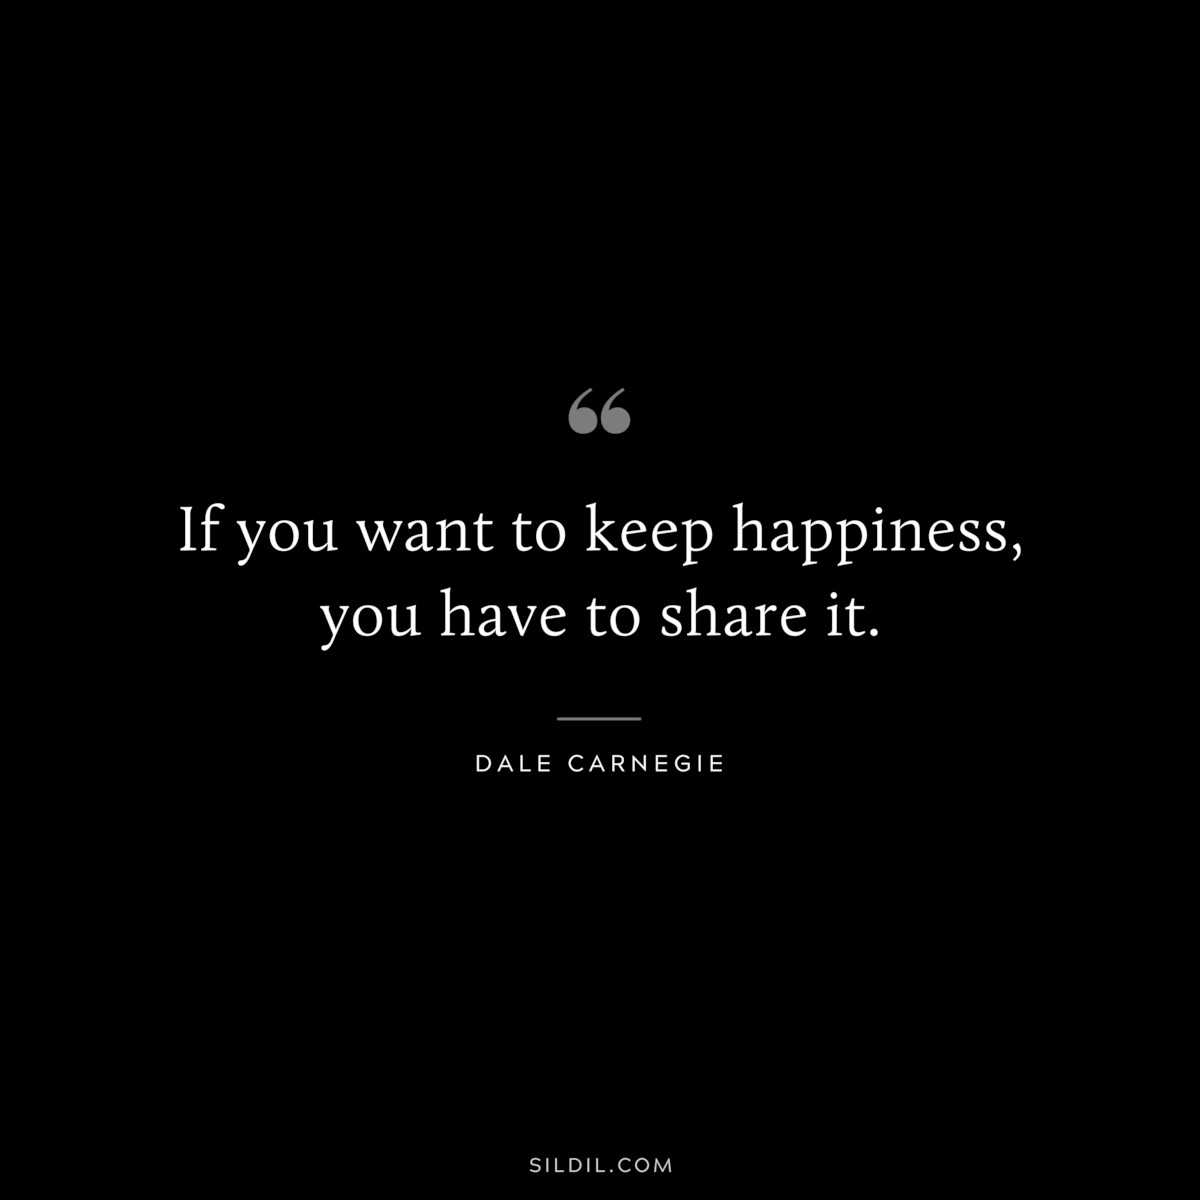 If you want to keep happiness, you have to share it.― Dale Carnegie